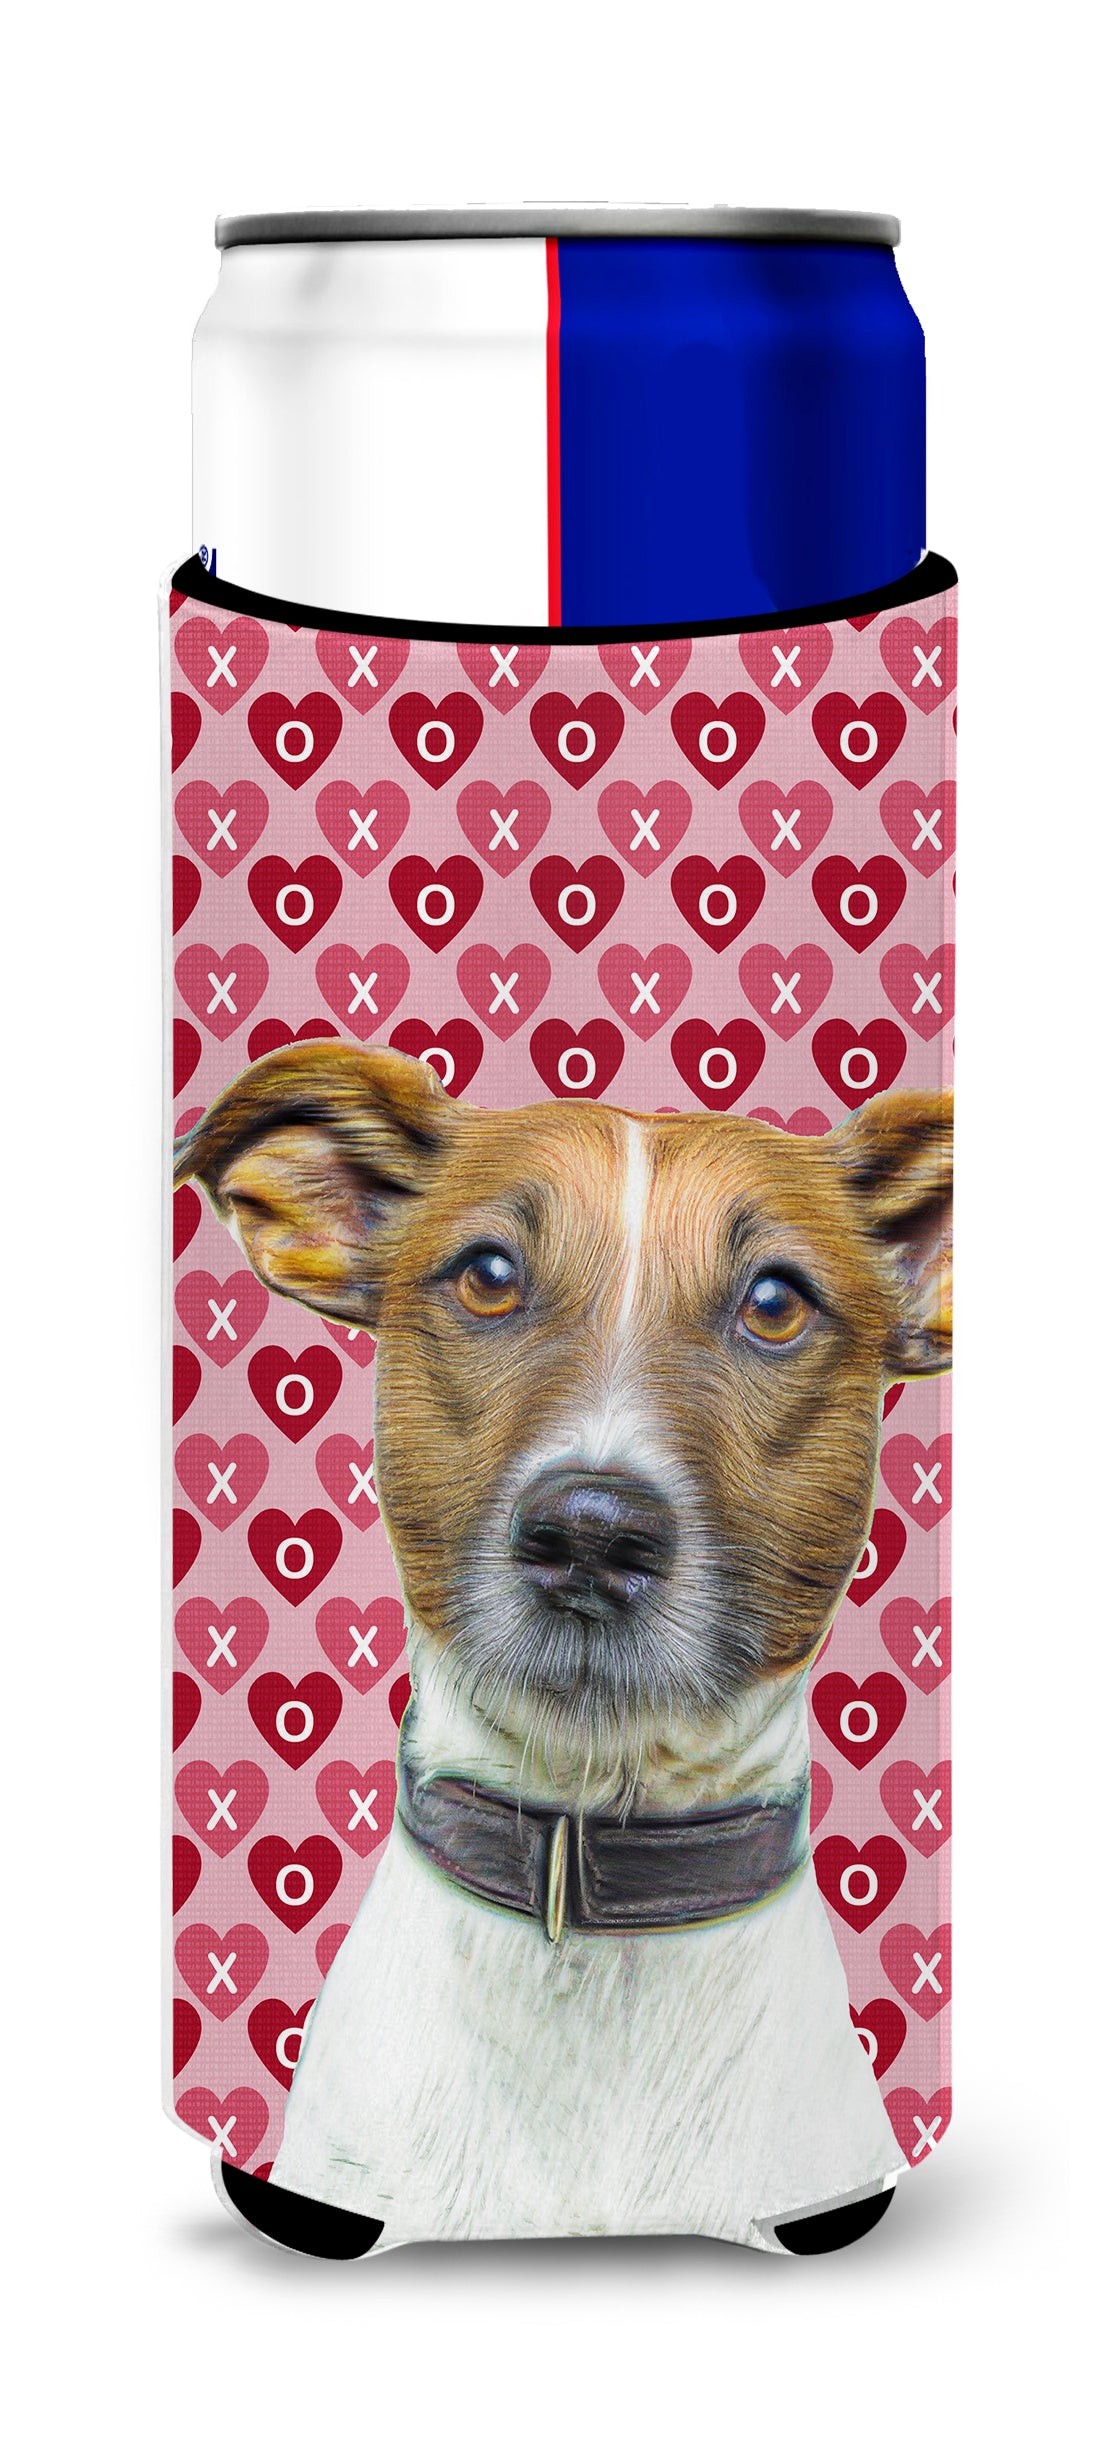 Hearts Love and Valentine's Day Jack Russell Terrier Ultra Beverage Insulators for slim cans KJ1190MUK.